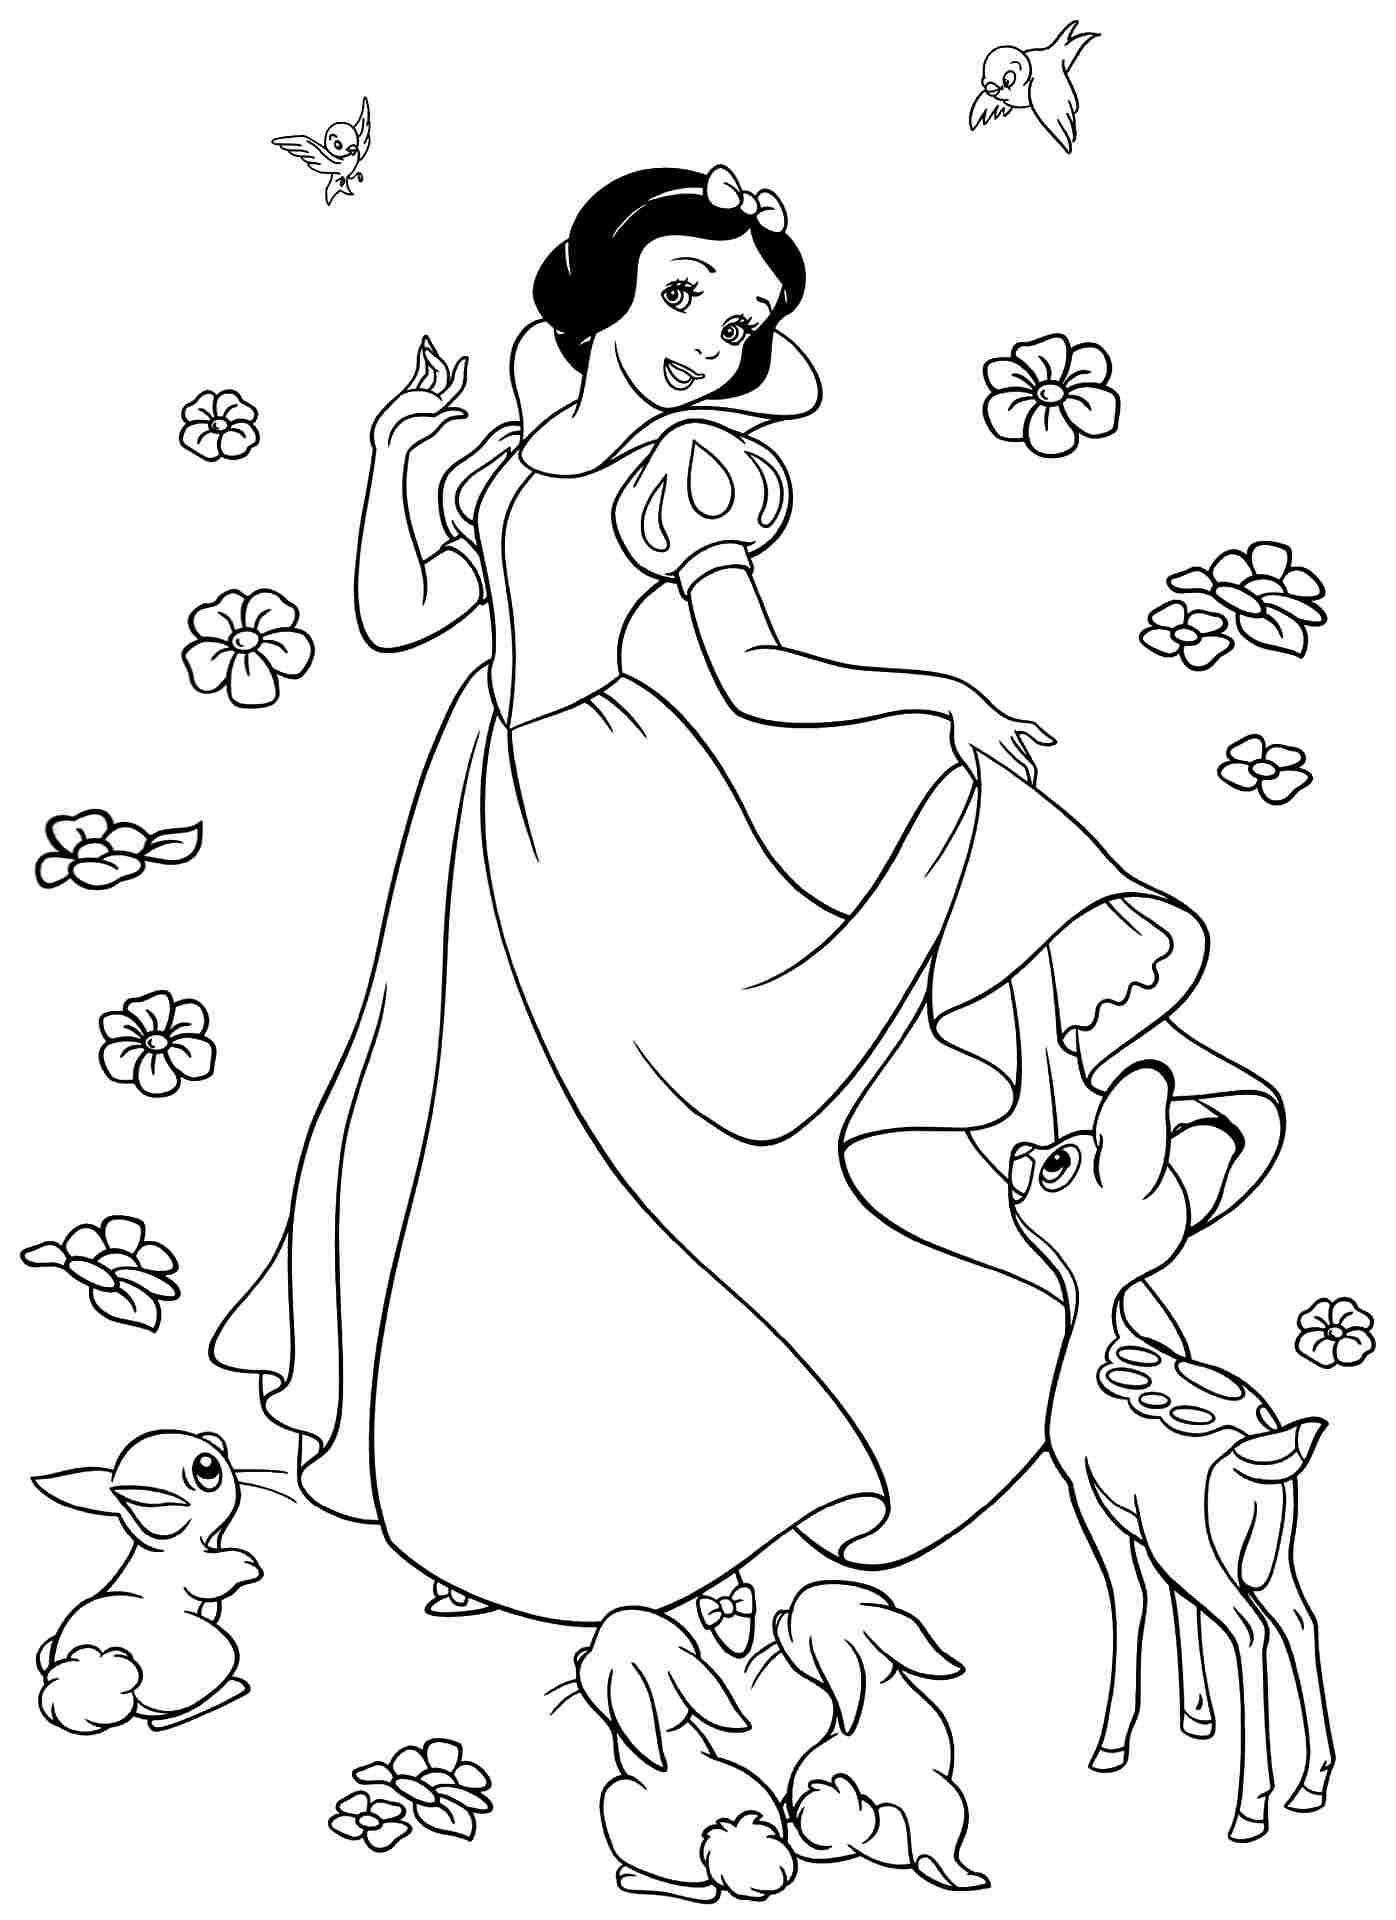 Snow white coloring pages to download and print for free